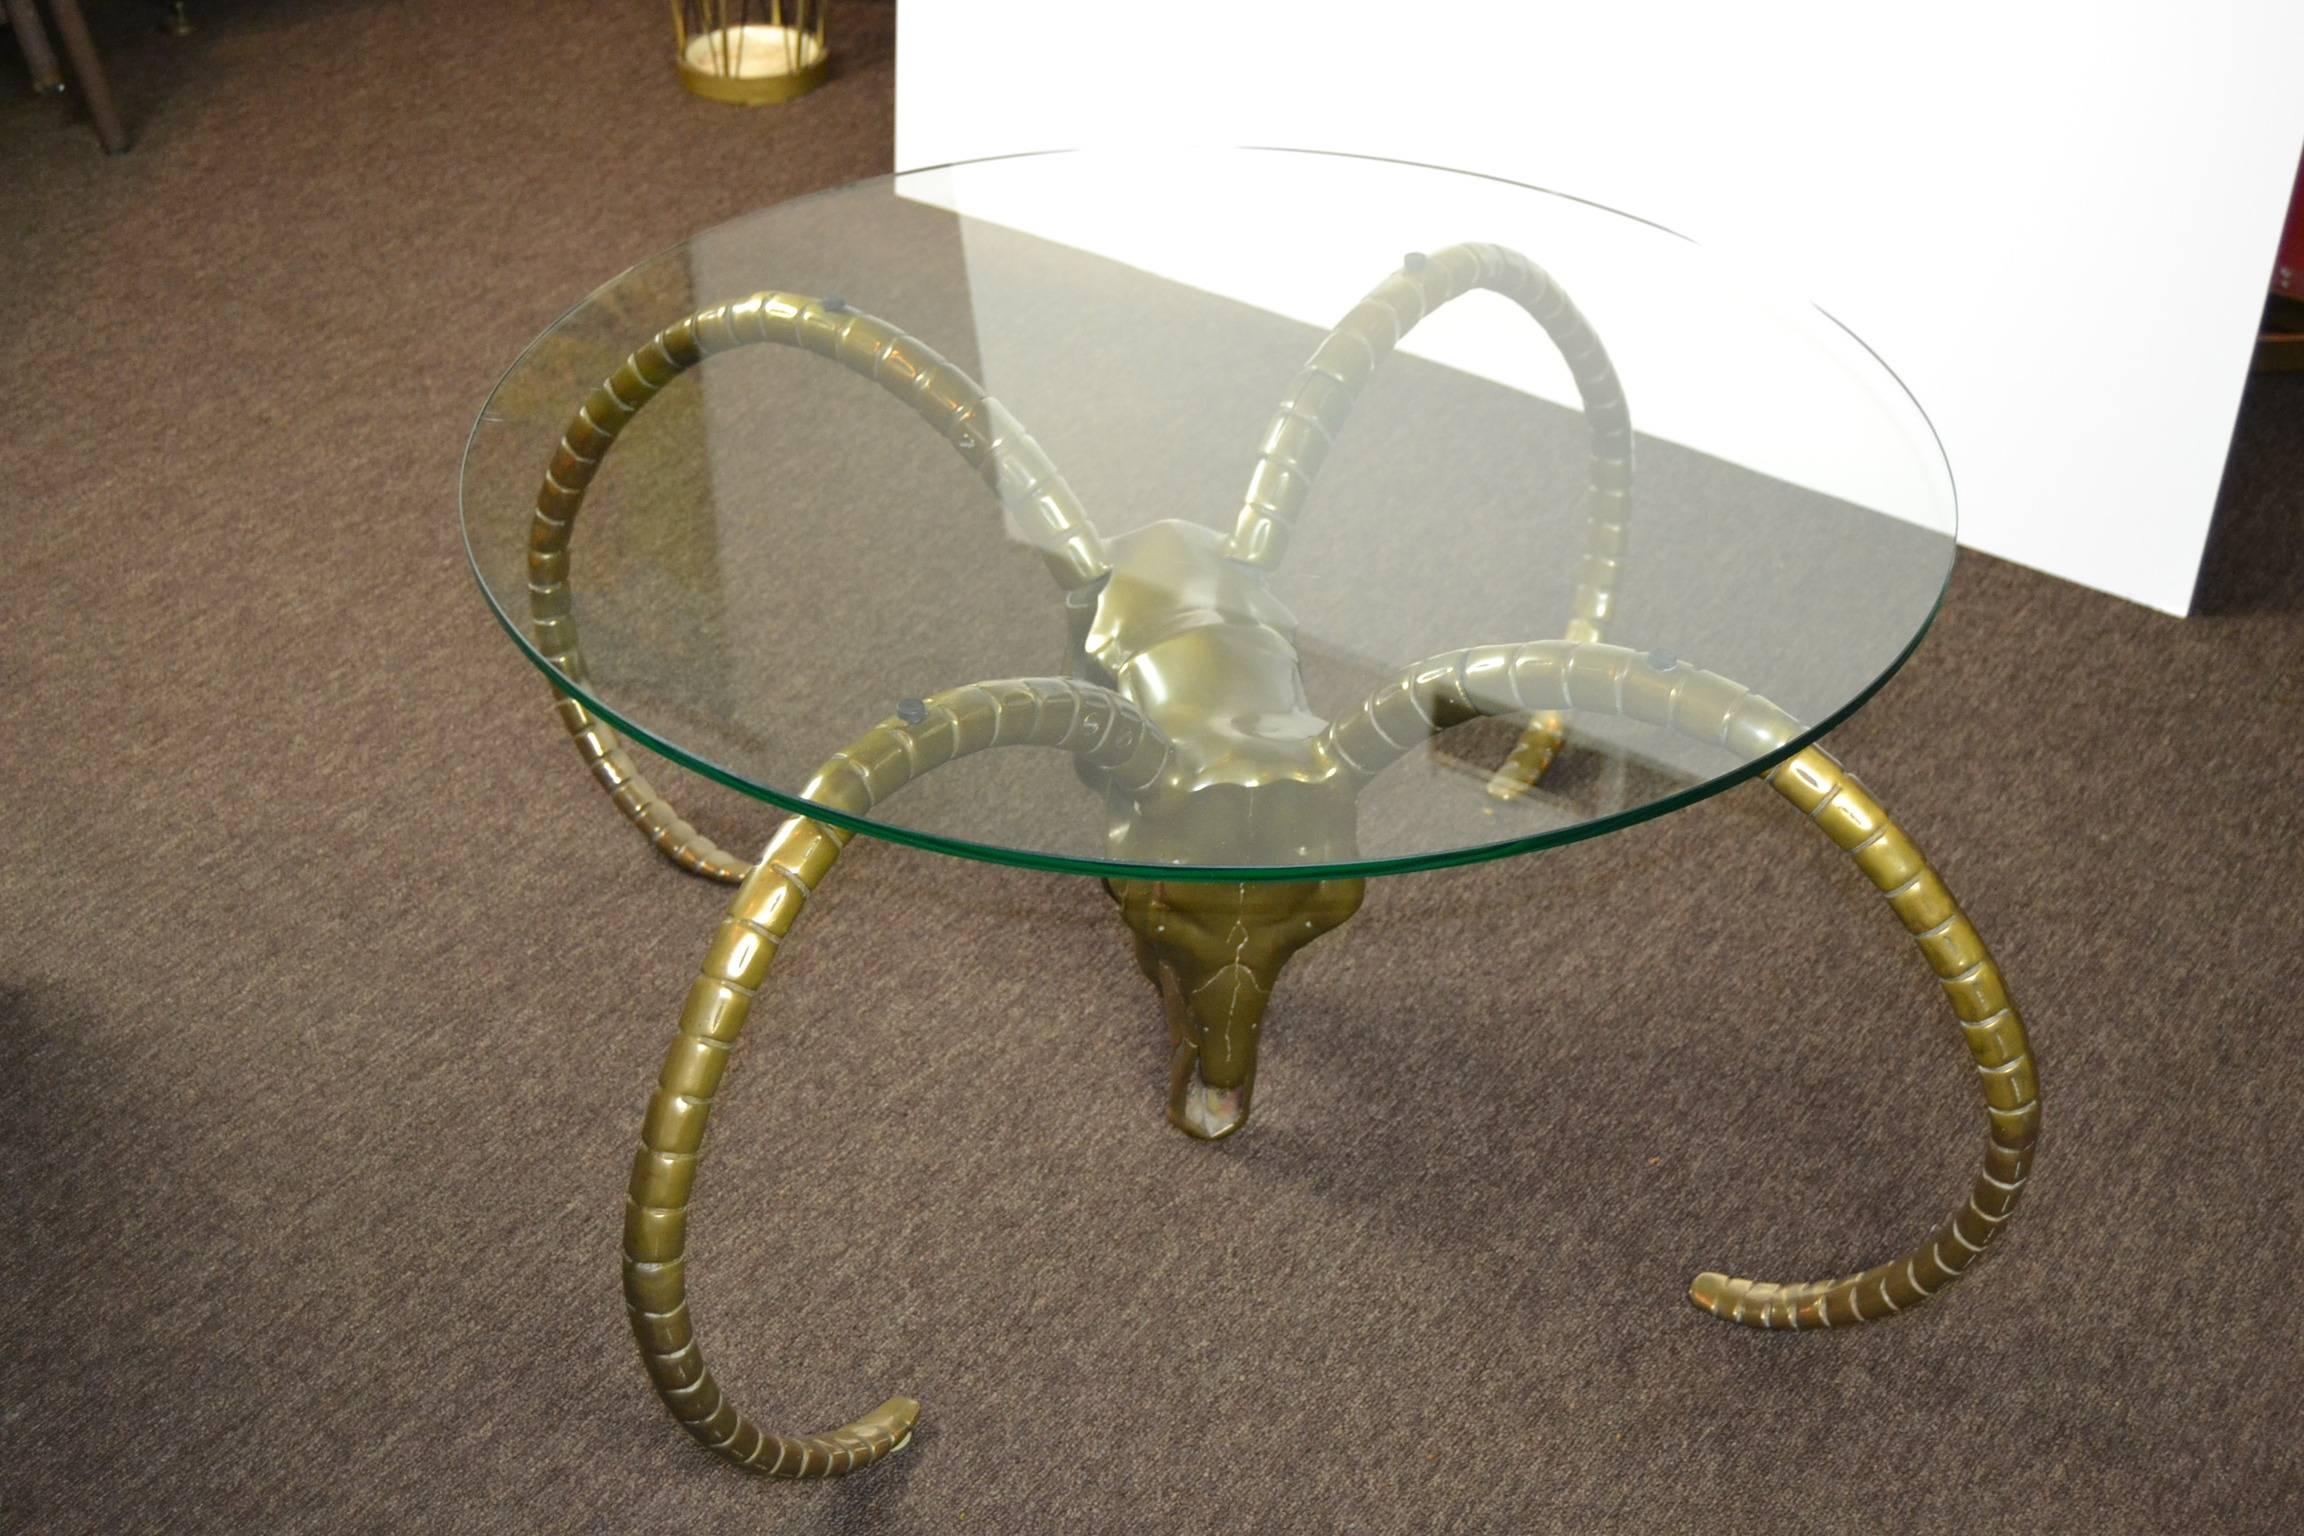 Impressive Ram's Head or Ibex Coffee Table Base from the 1960s.
The heads and horns are made of brass.
You can screw of the horns for cleaning or packaging.
The brass base shows some authentic patina.

Cool coffee table or side table that can fit